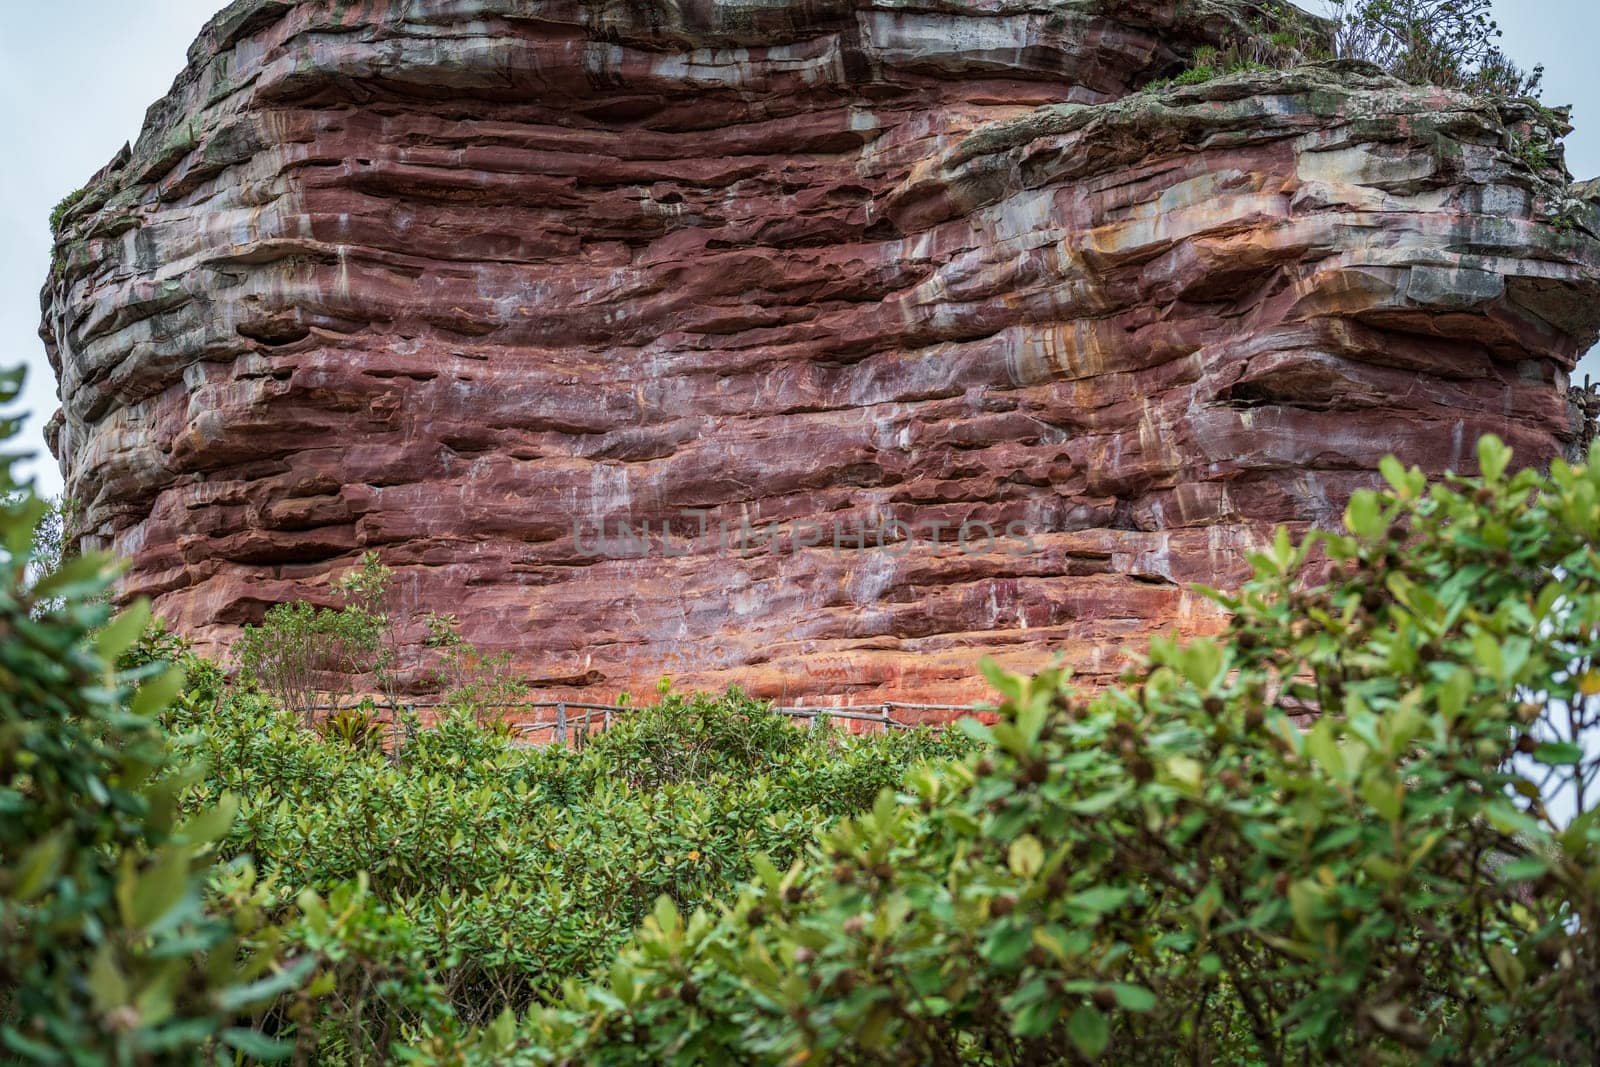 Red sandstone cliff juxtaposed with lush greenery in a striking natural scene.